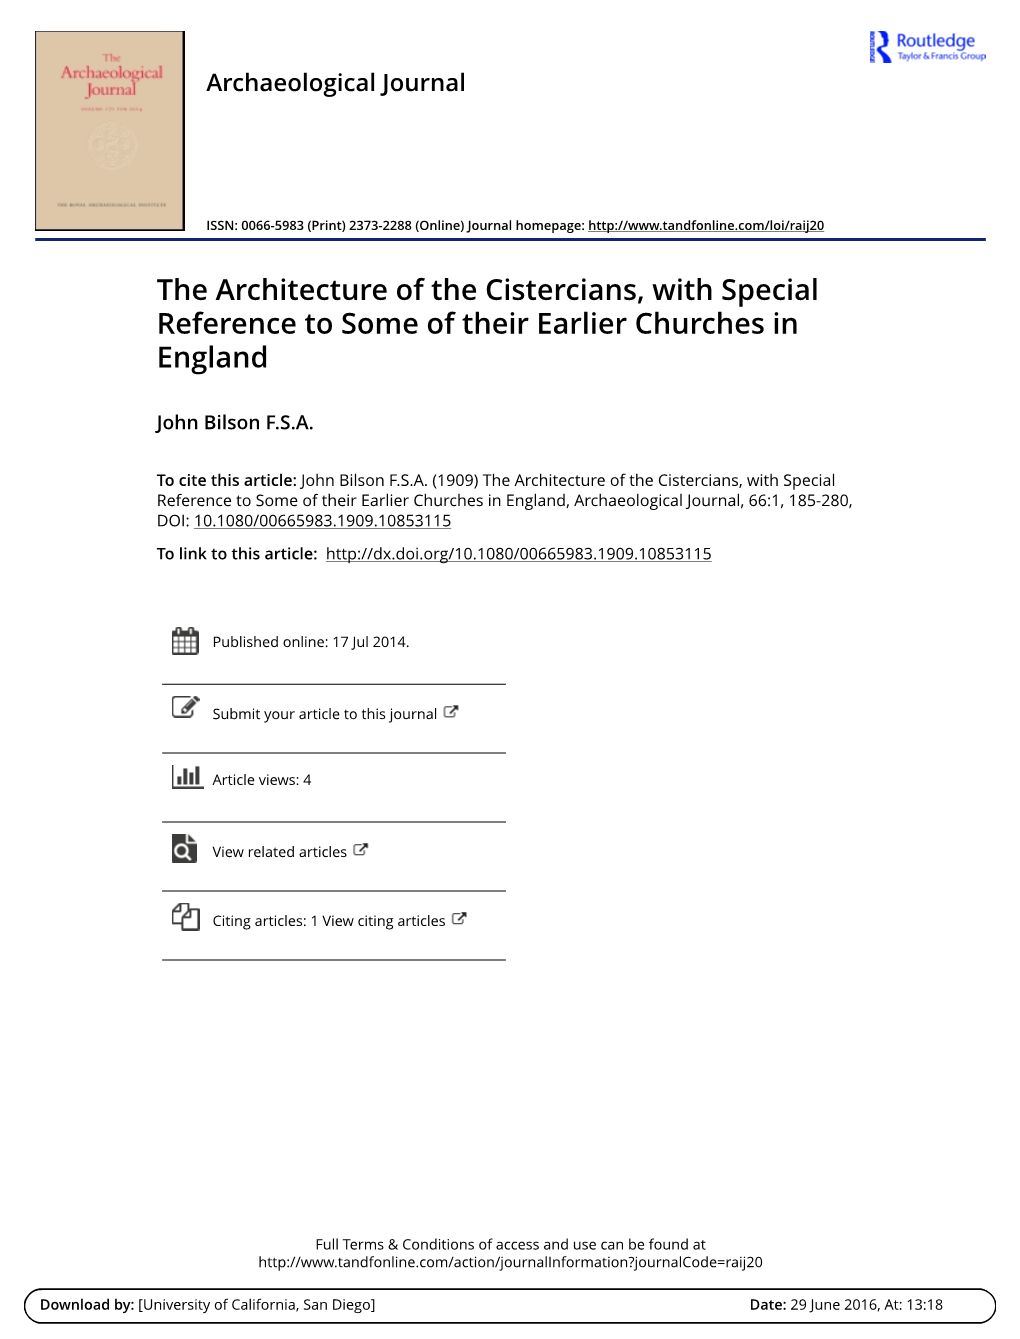 The Architecture of the Cistercians, with Special Reference to Some of Their Earlier Churches in England